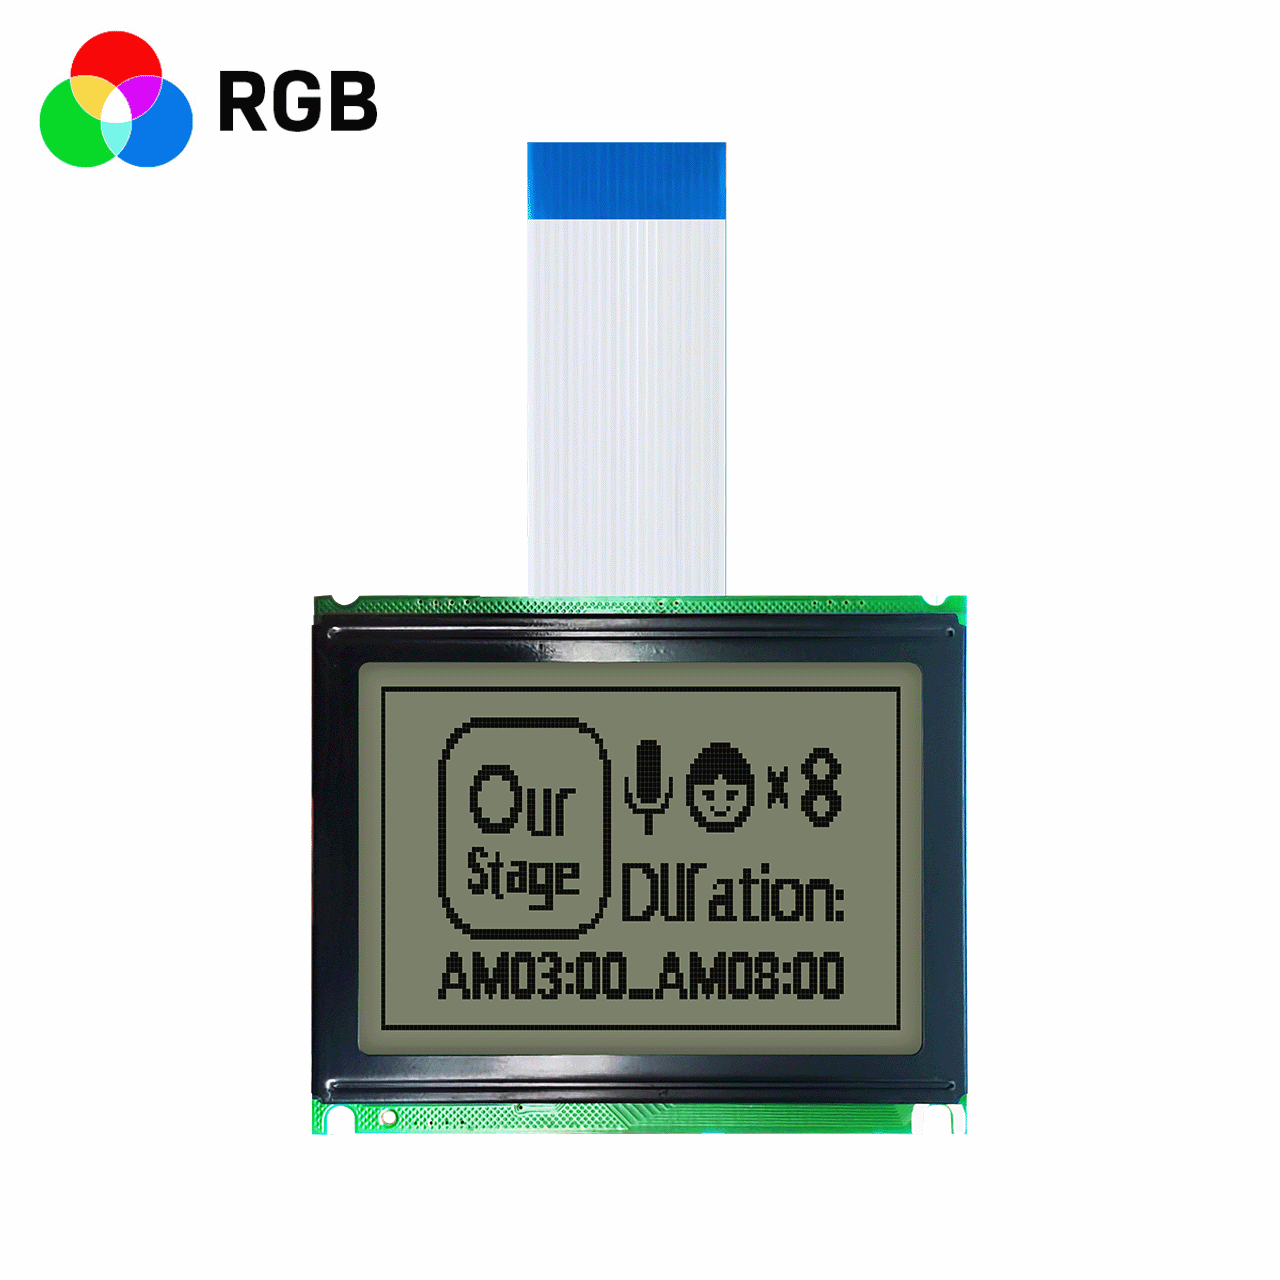 3-inch 128x64 Graphic LCD Display | 3.3V/5.0V | 12864 Graphic LCD Module | FSTN Positive Display | RGB Red, Green and Blue Backlight | Fully Transmissive Polarizer